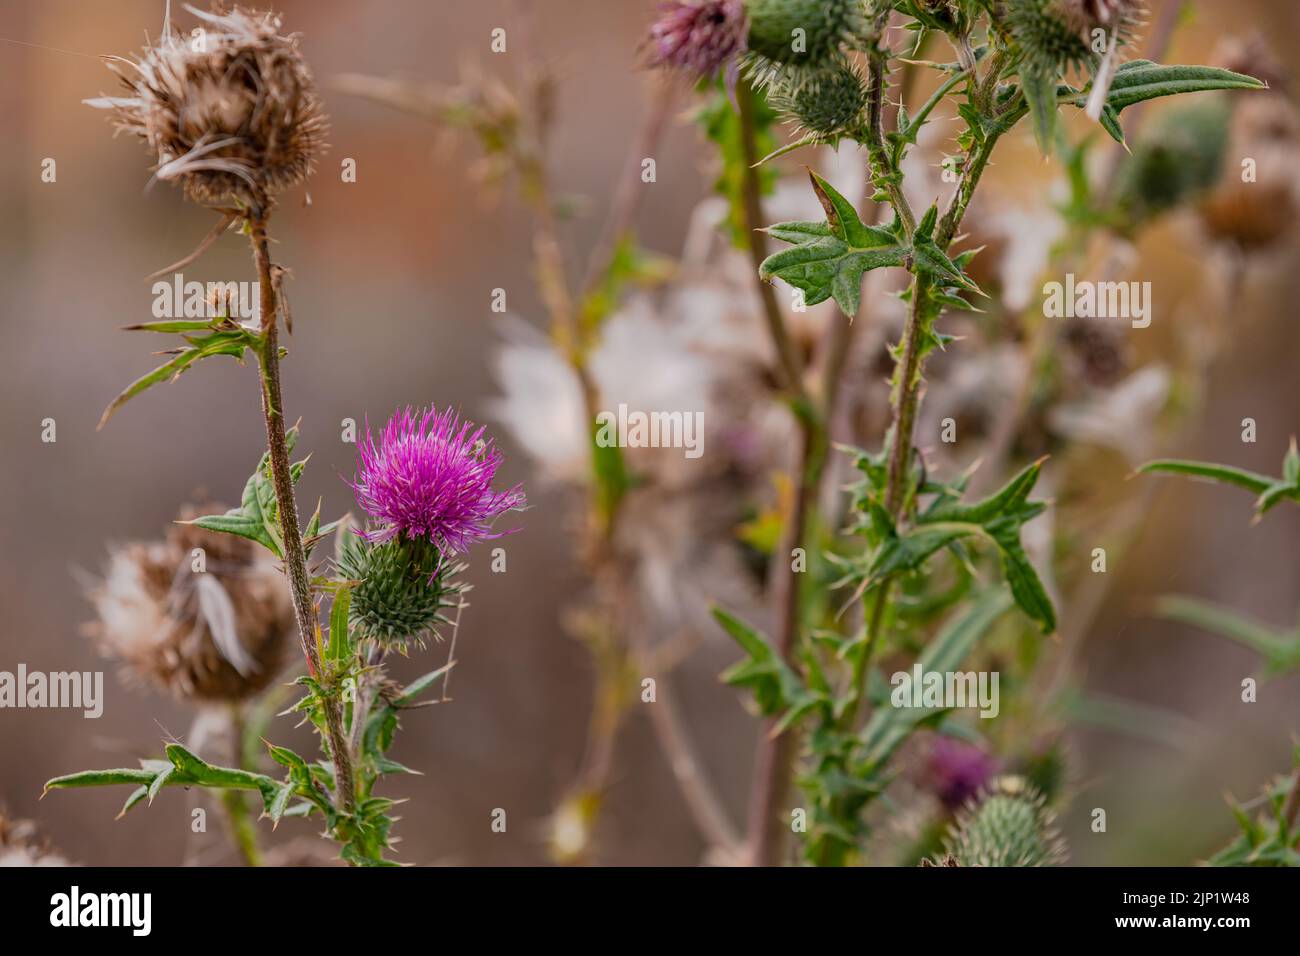 Inflorescence, purple flower and leaves of a creeping thistle isolated on a meadow in autumn Stock Photo